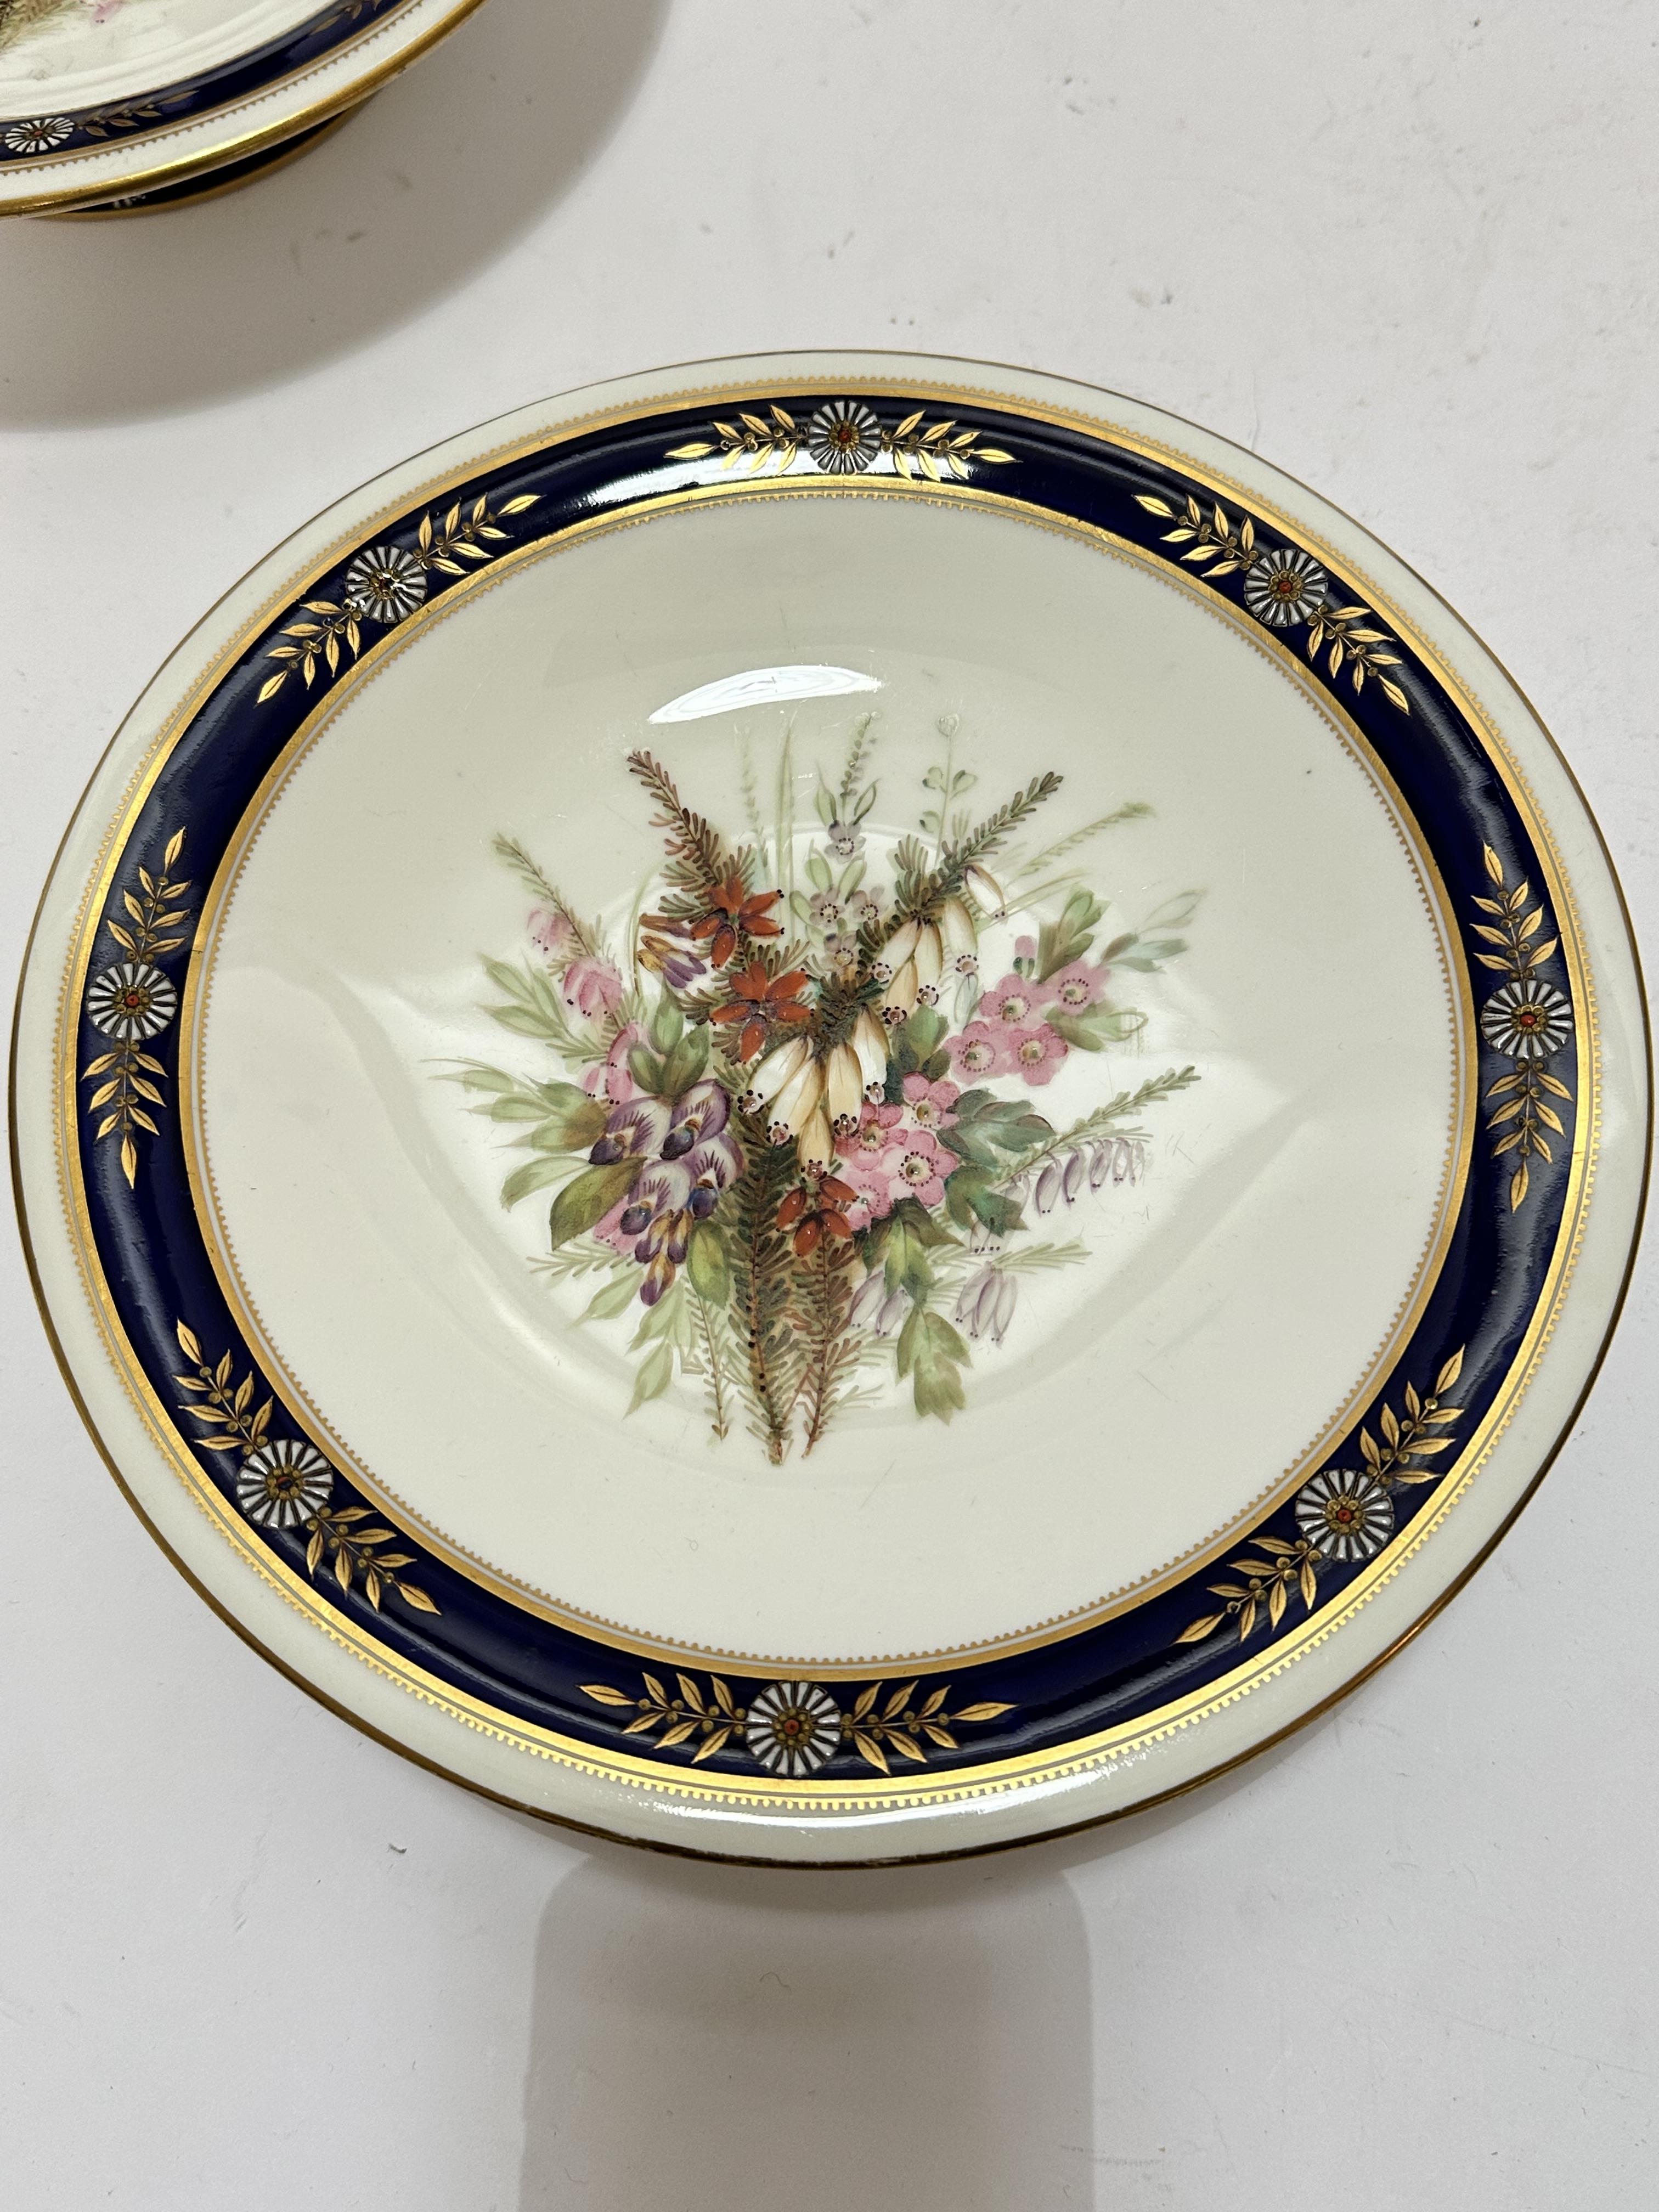 An Edwardian Royal Worcester nineteen piece dessert service including three stands, (5cm x 23cm) and - Image 23 of 29